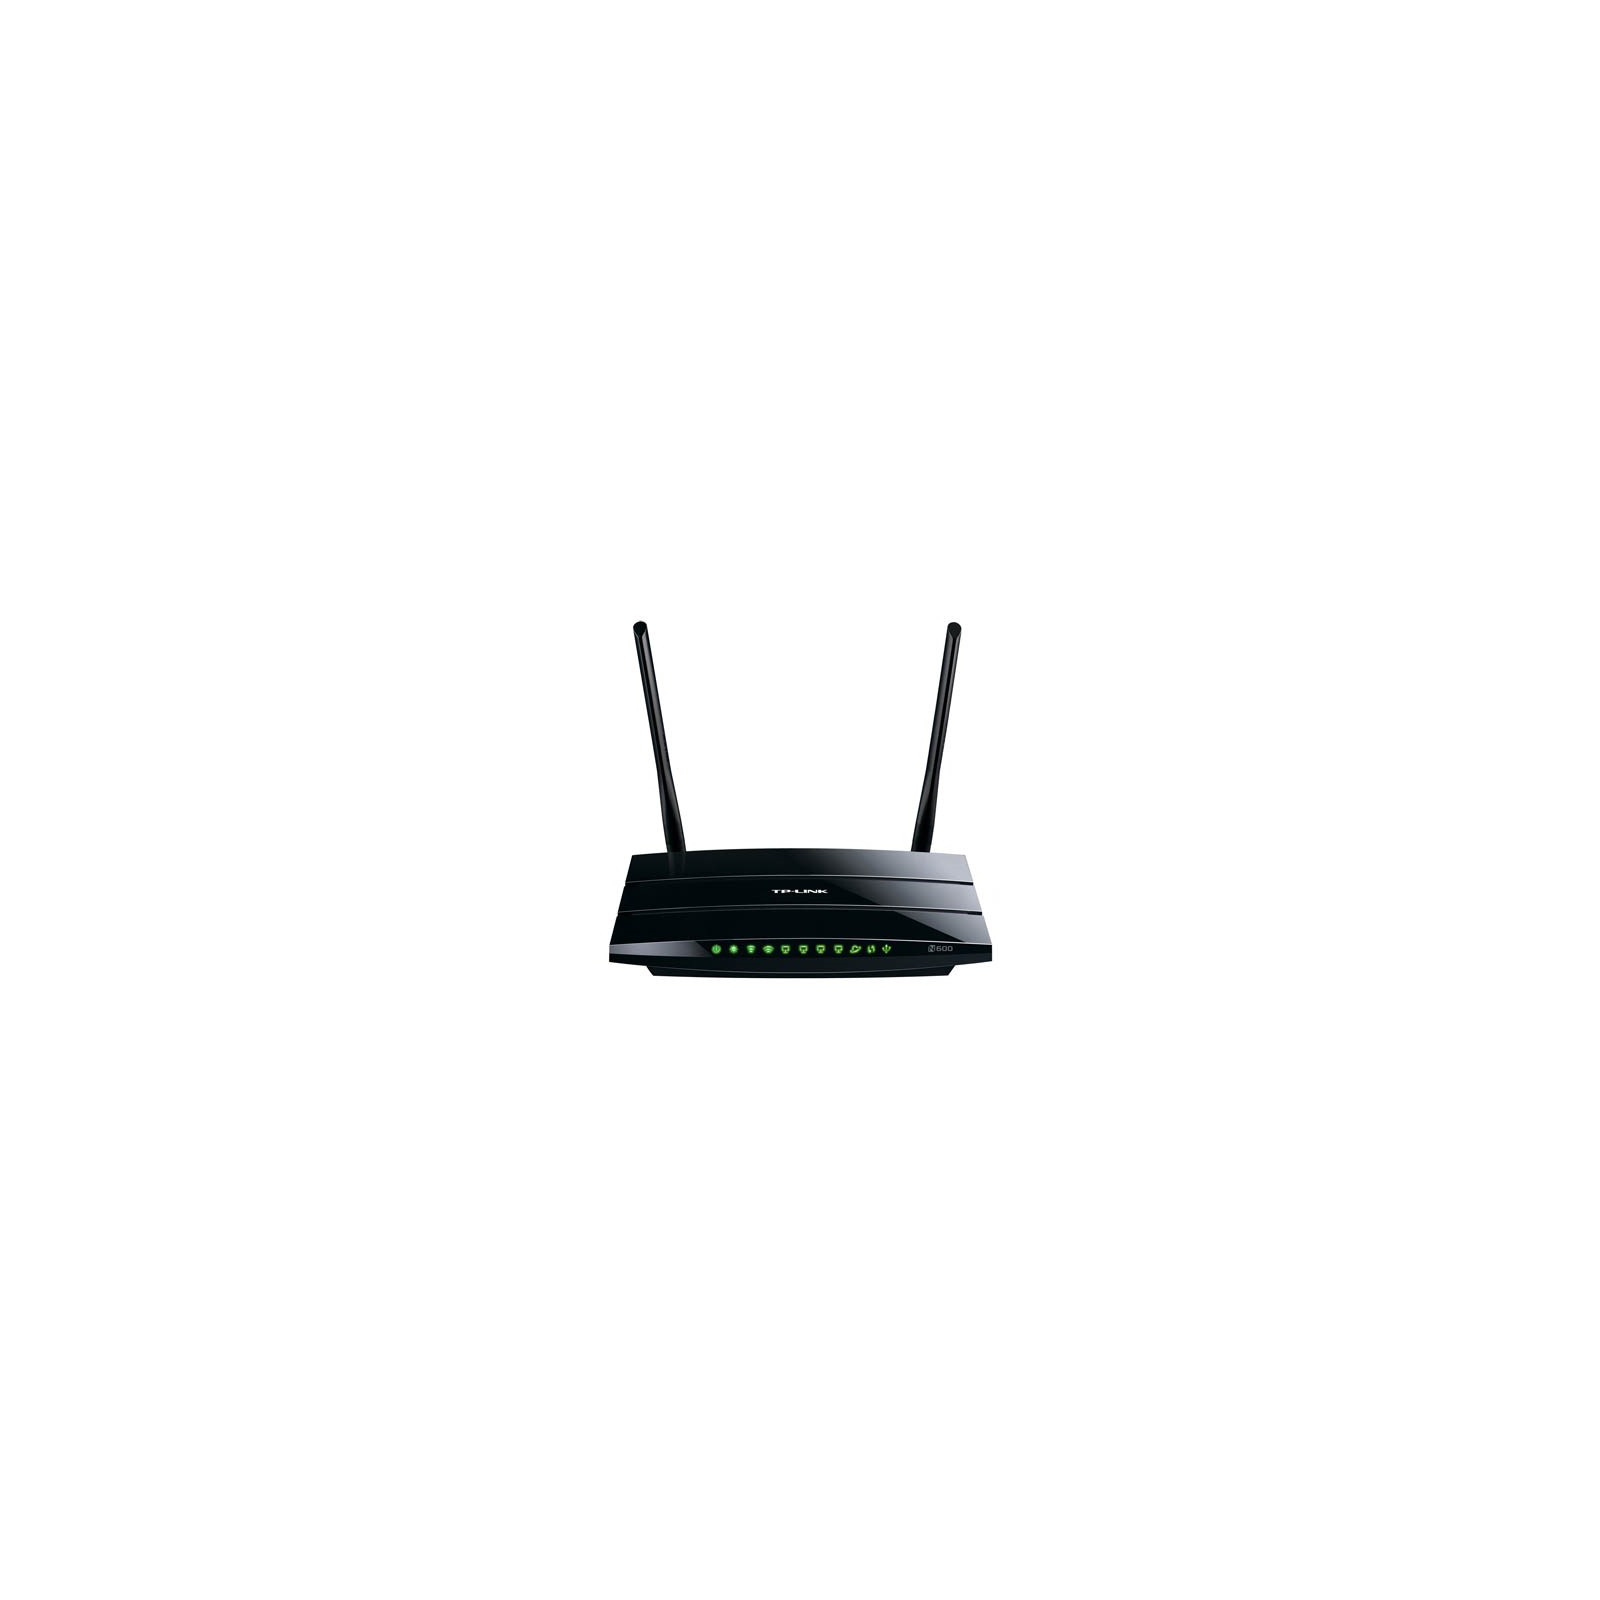 Маршрутизатор TP-Link TL-WDR3500